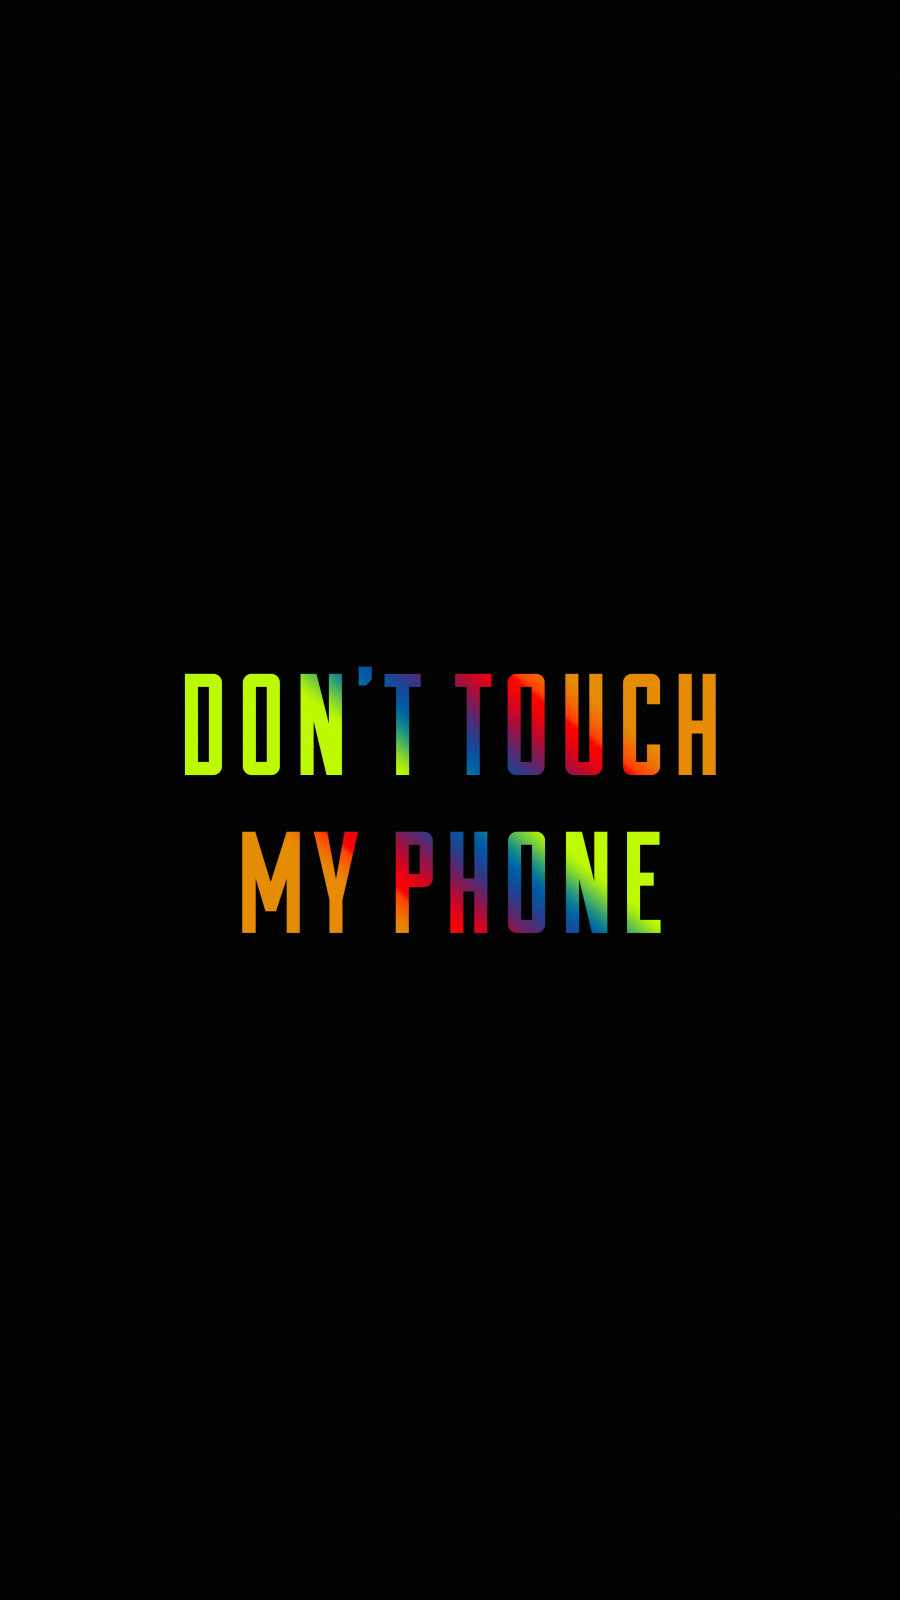 Do Not Touch My Phone iPhone Wallpaper